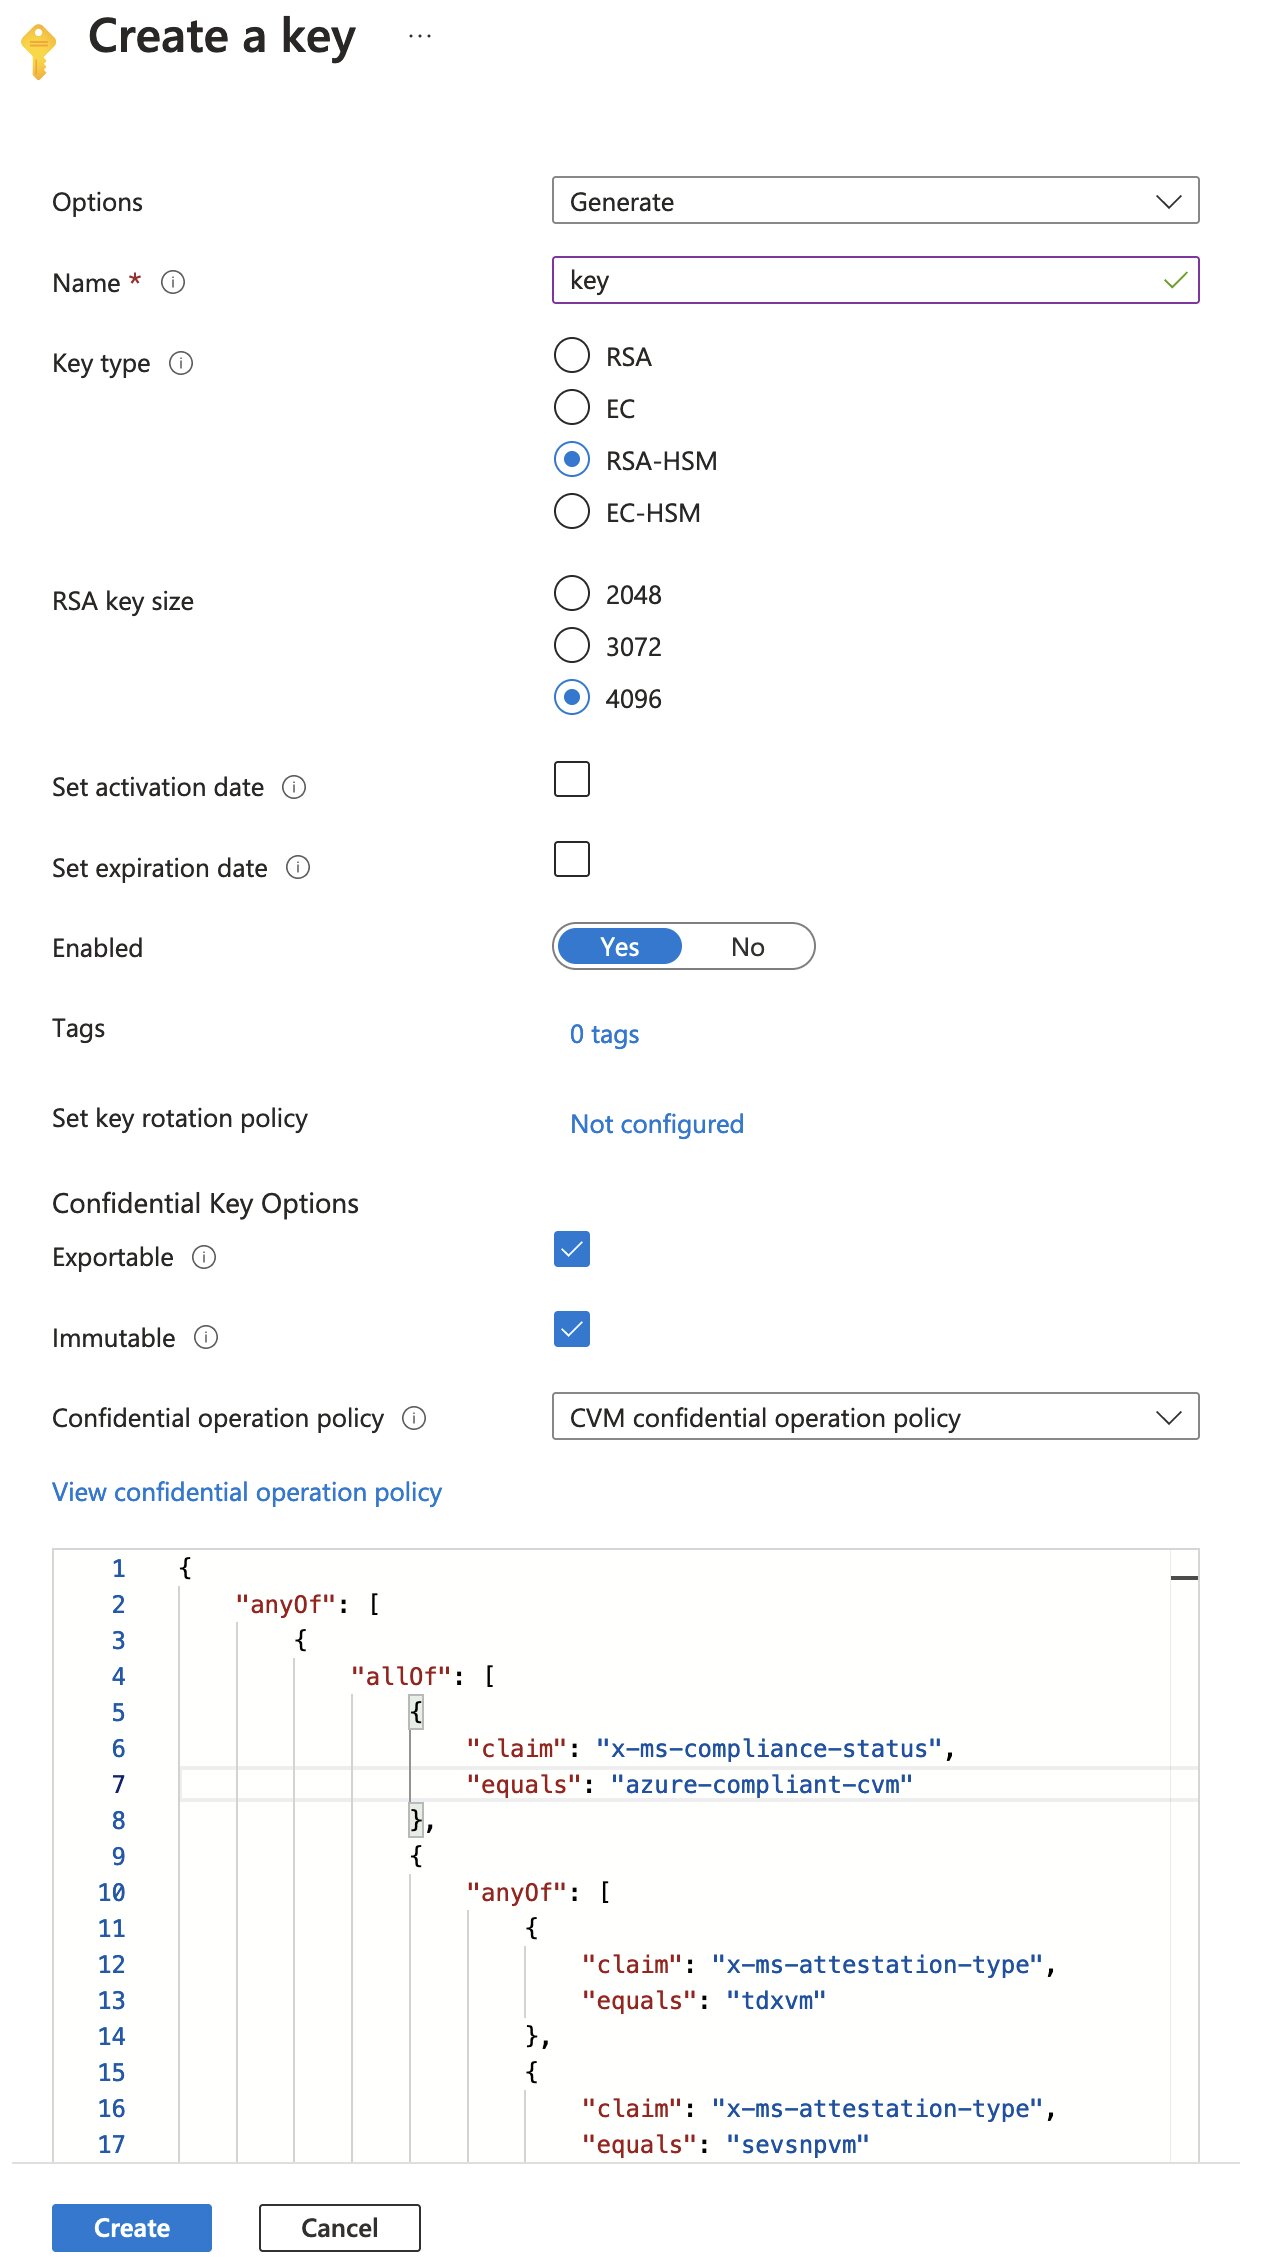 A screenshot of the Azure Portal User Interface, more specifically the key creation screen and the confidential operation policy.